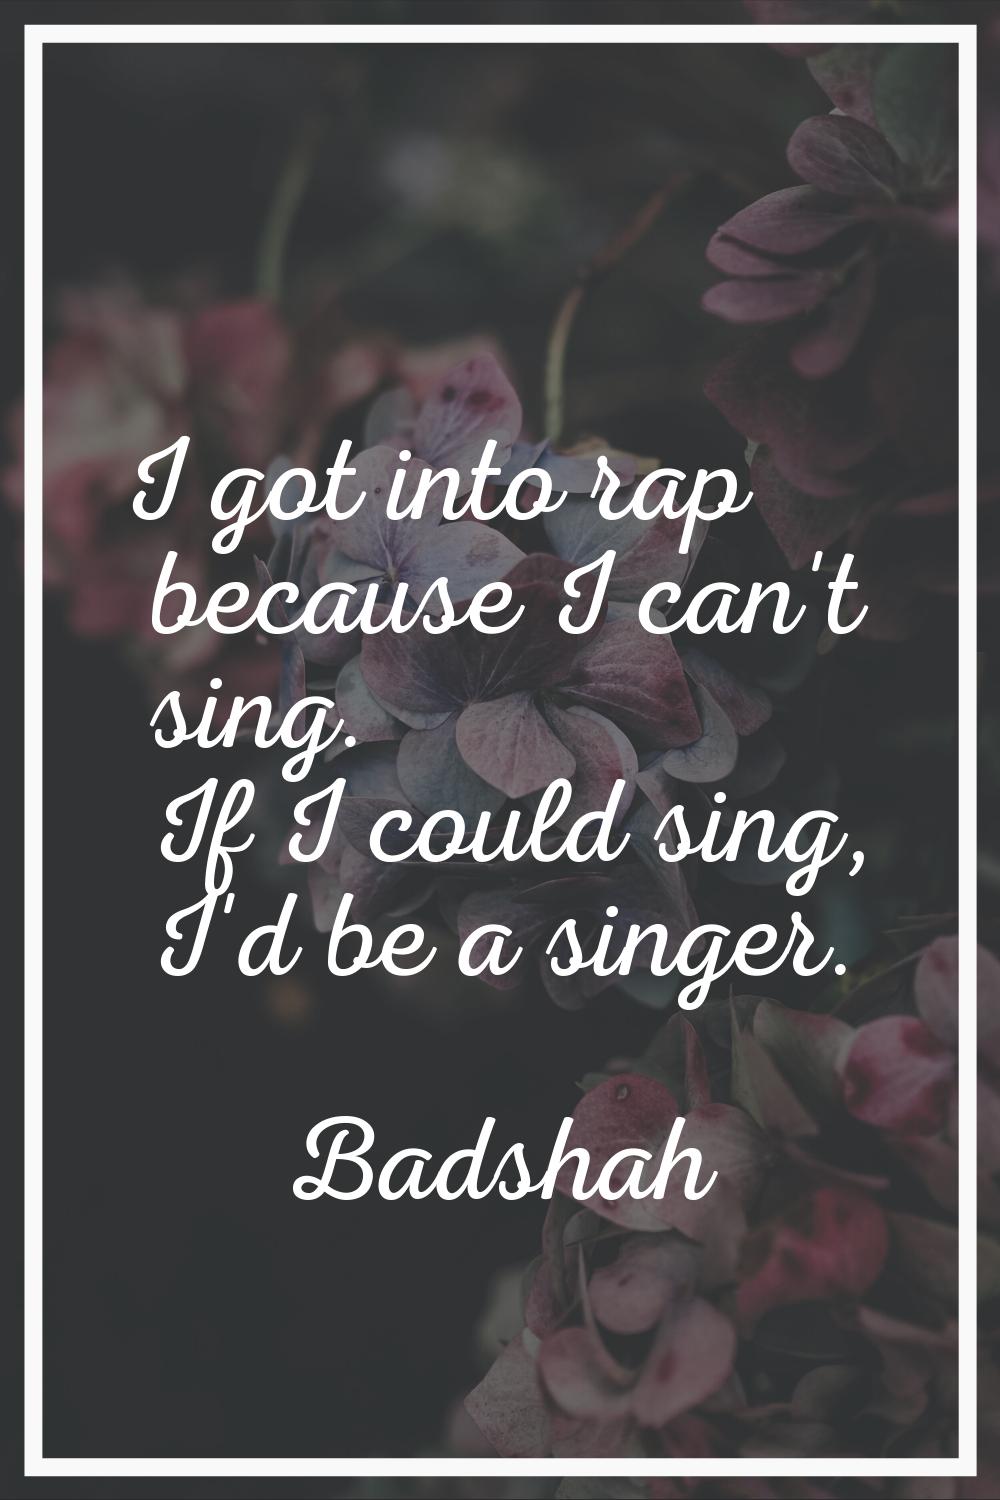 I got into rap because I can't sing. If I could sing, I'd be a singer.